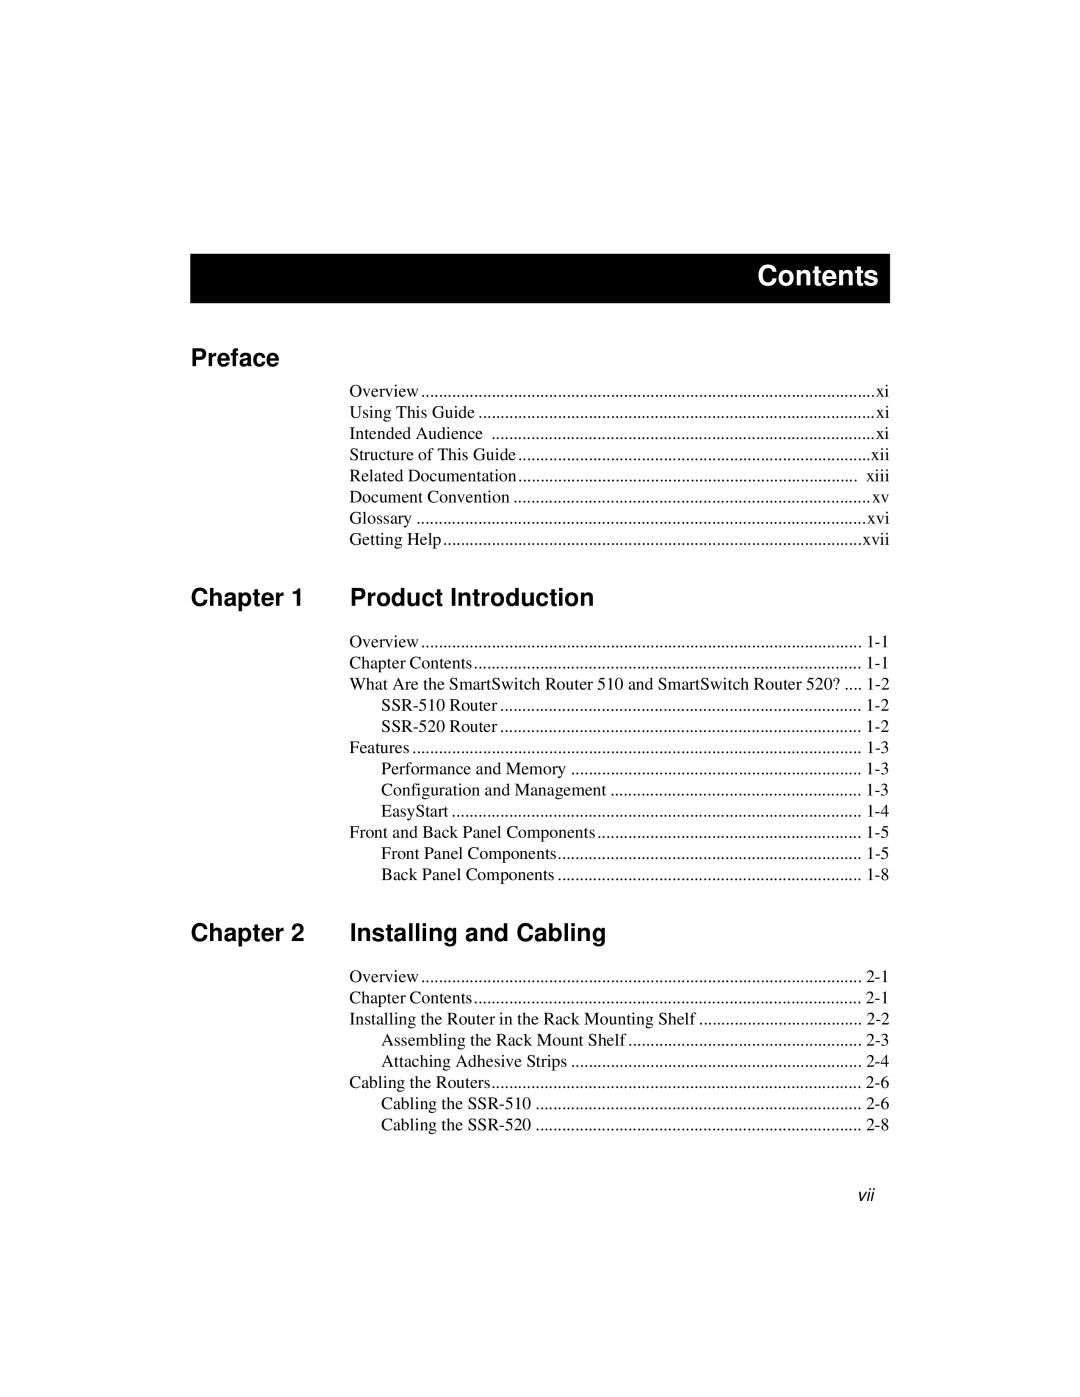 Cabletron Systems 520, 510 manual Contents 